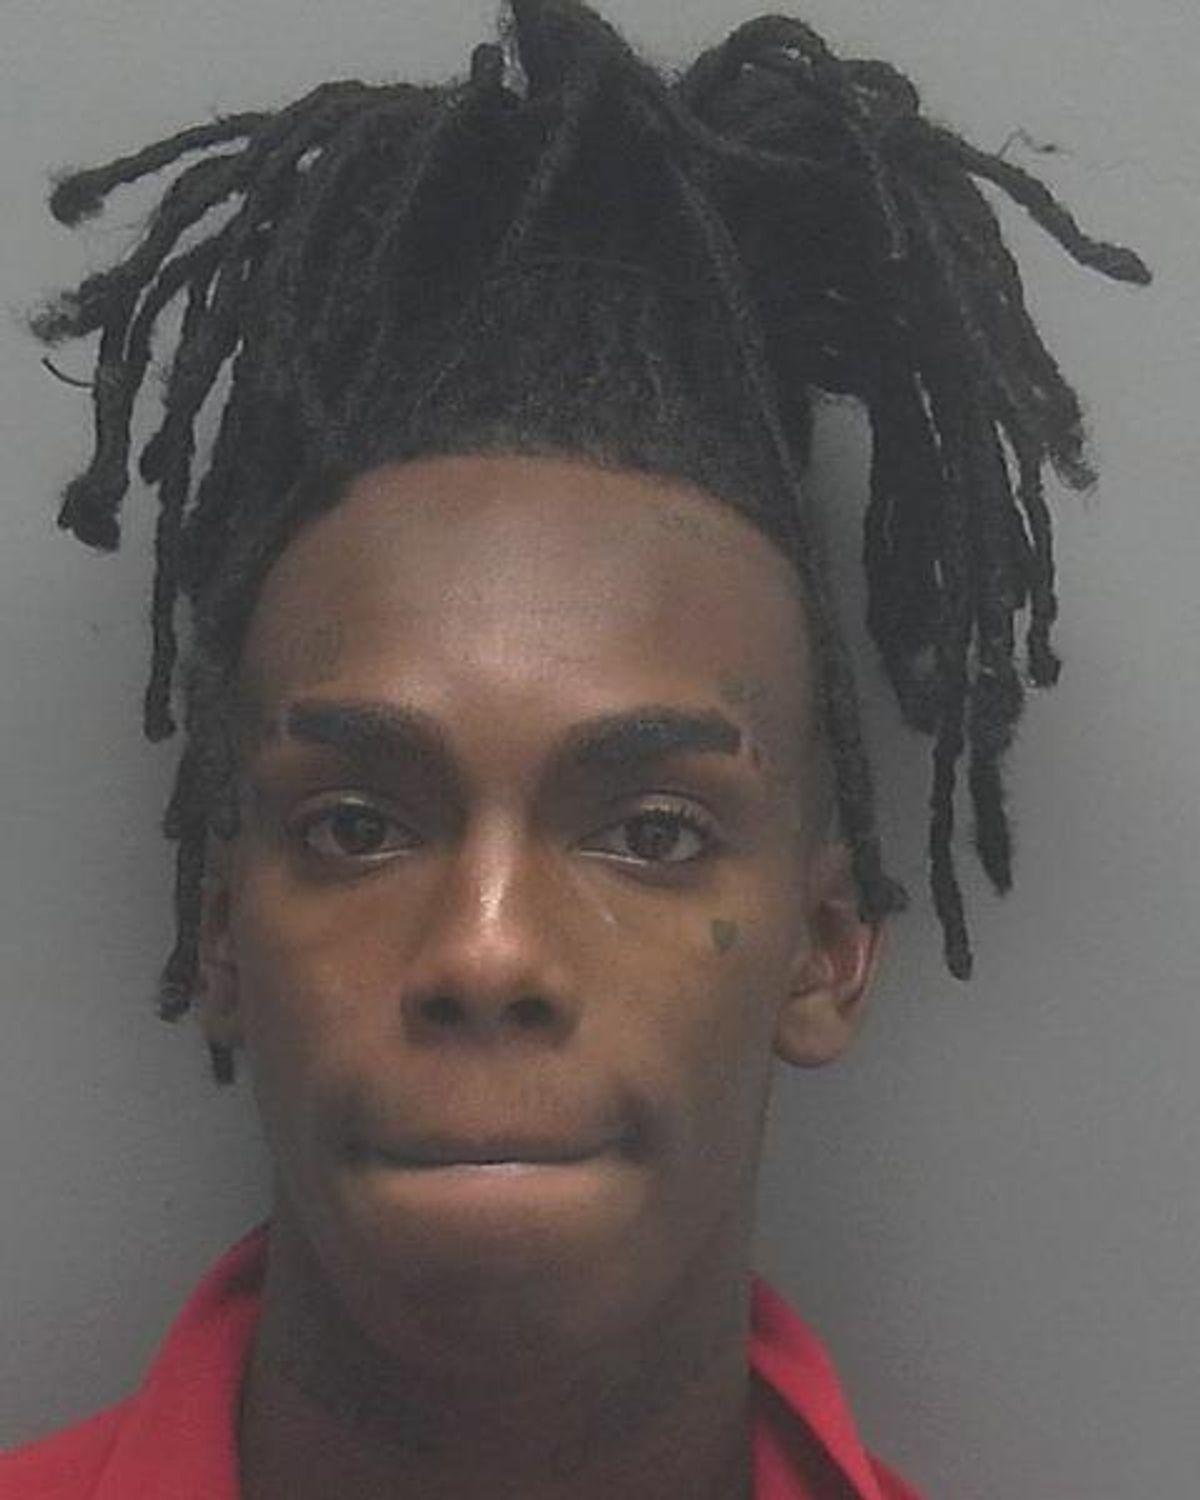 YNW Melly murder charges: What we know